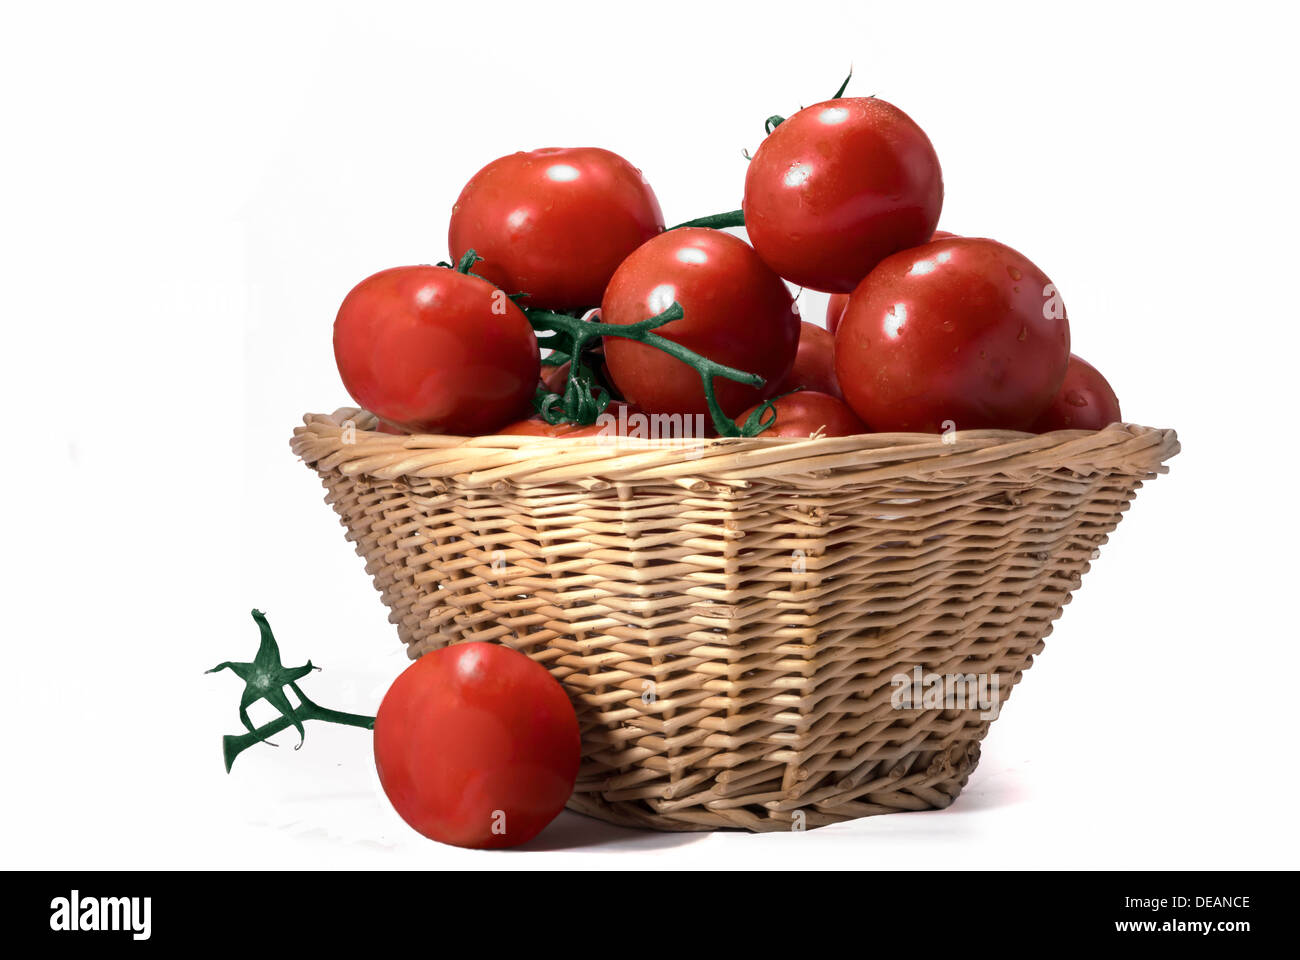 A wicker basket overflowing with ripe tomatoes Stock Photo